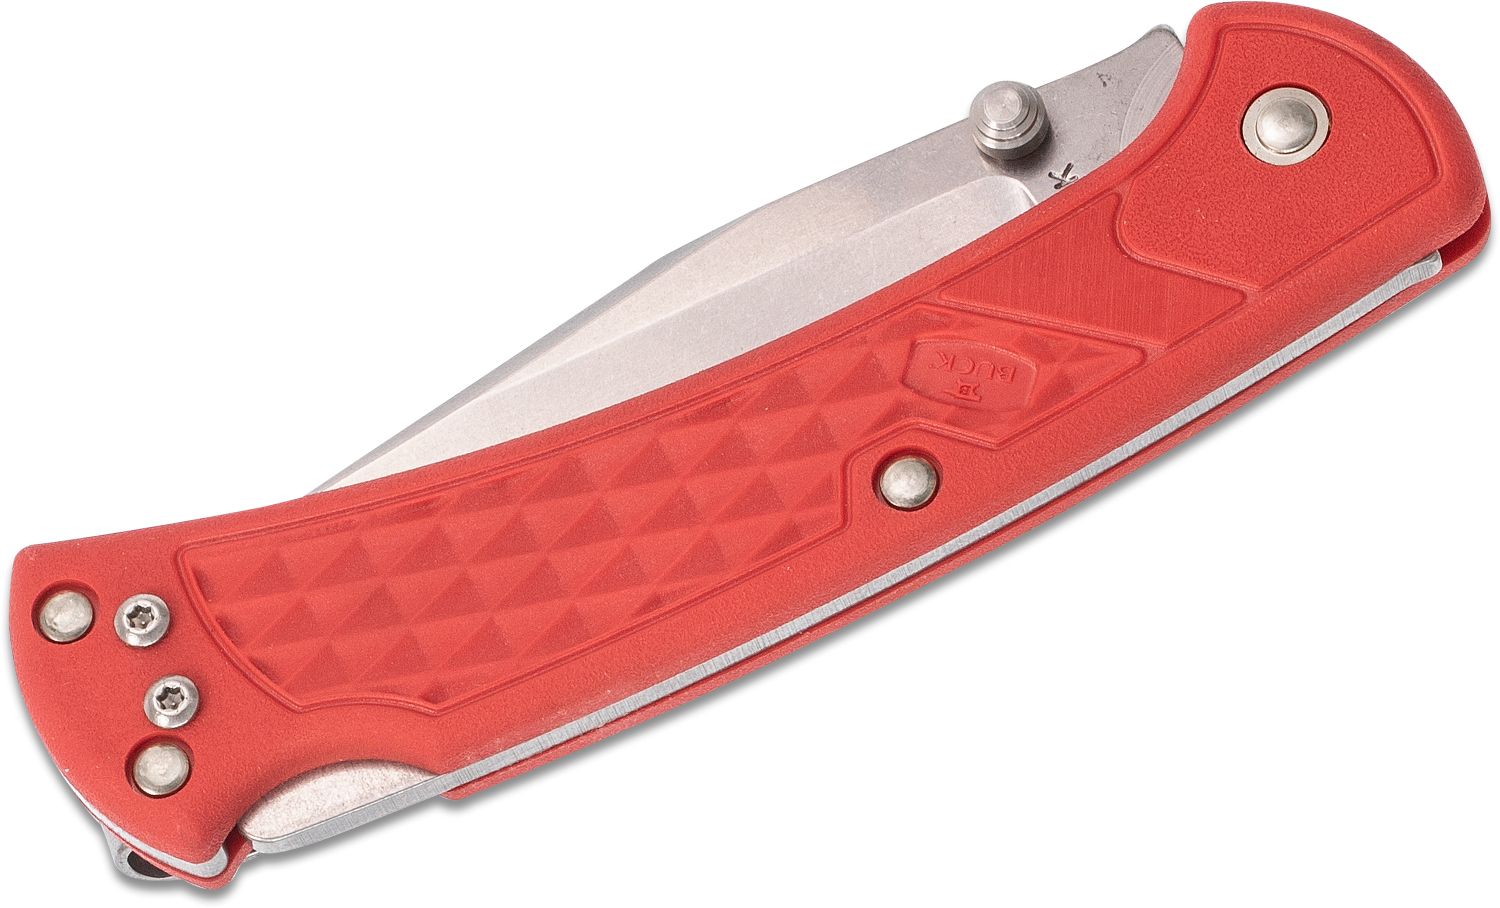  Buck Knives 112 Slim Select Folding Lockback Pocket Knife with  Thumb Studs and Removable/Reversible Deep Carry Pocket Clip, Nylon Handles,  3 420HC Blade : Sports & Outdoors